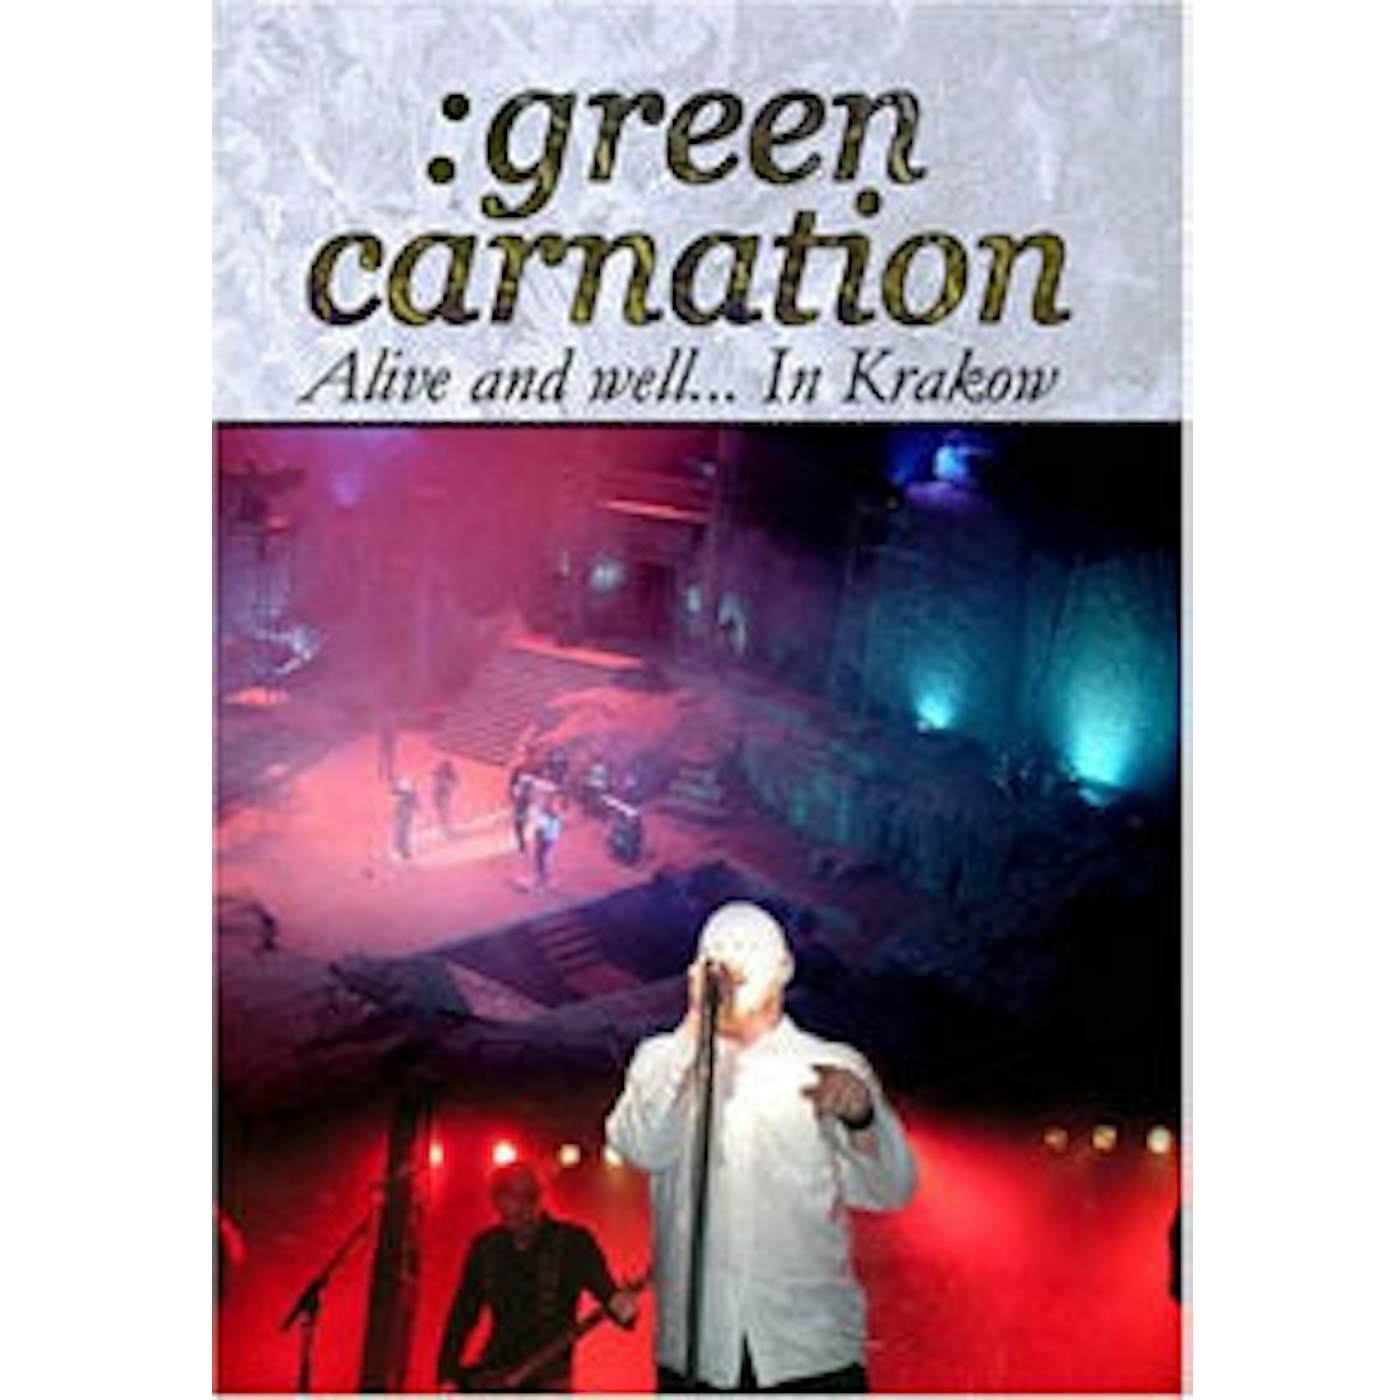 Green Carnation DVD - Alive And Well... In Krakow